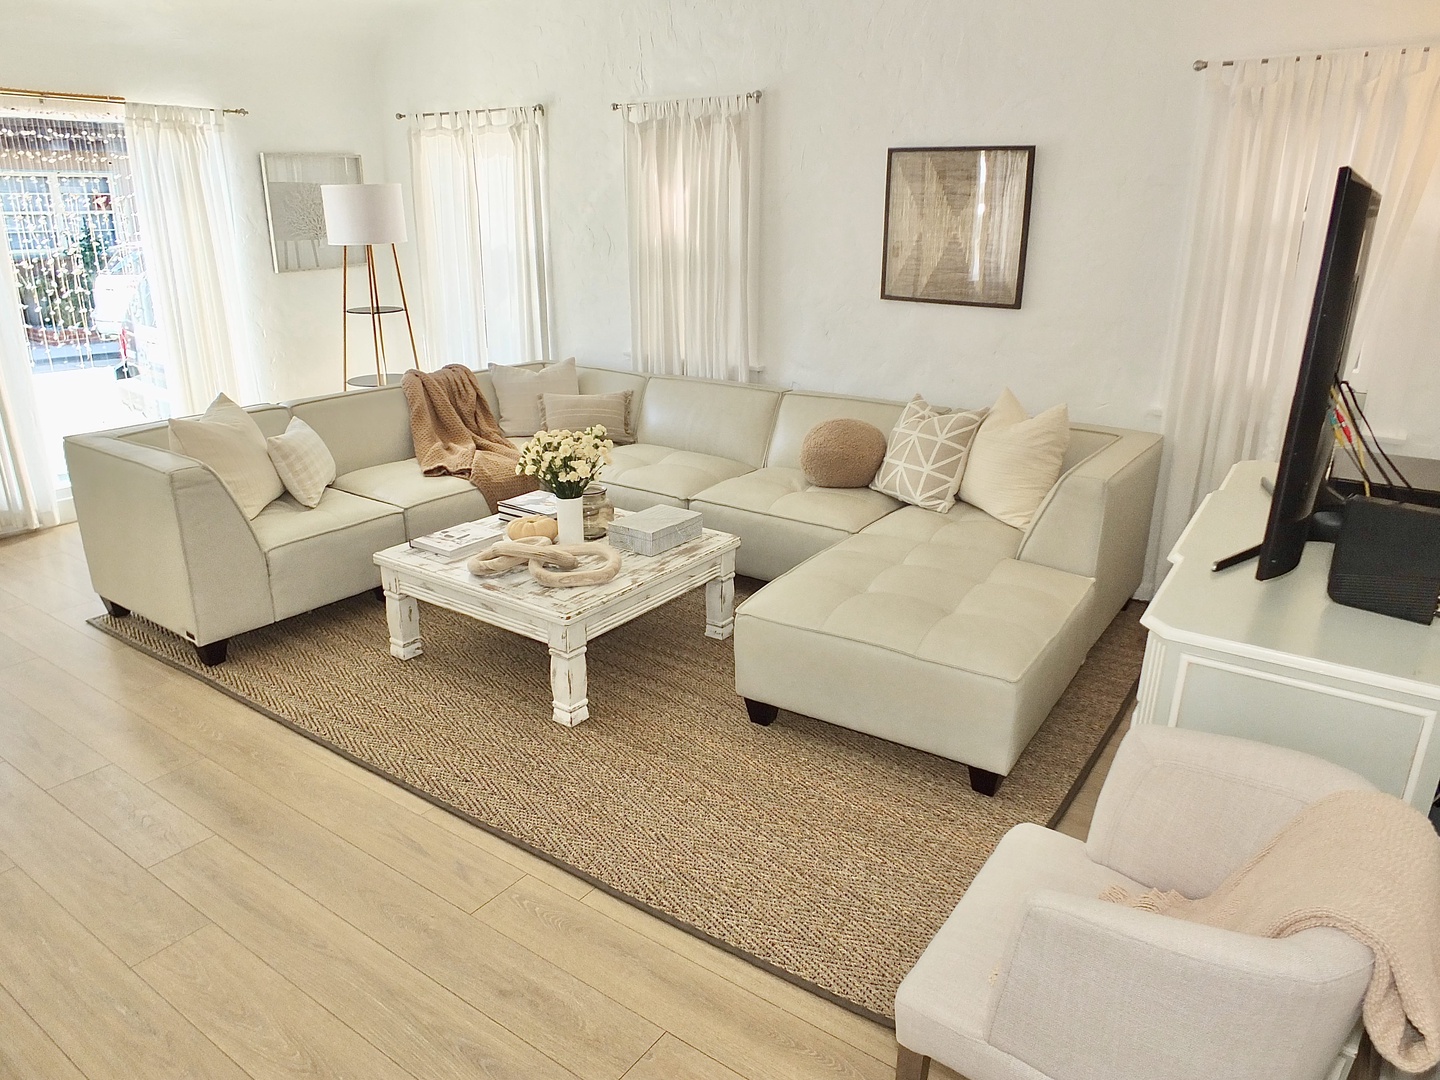 Bright living space with ample seating and Smart TV